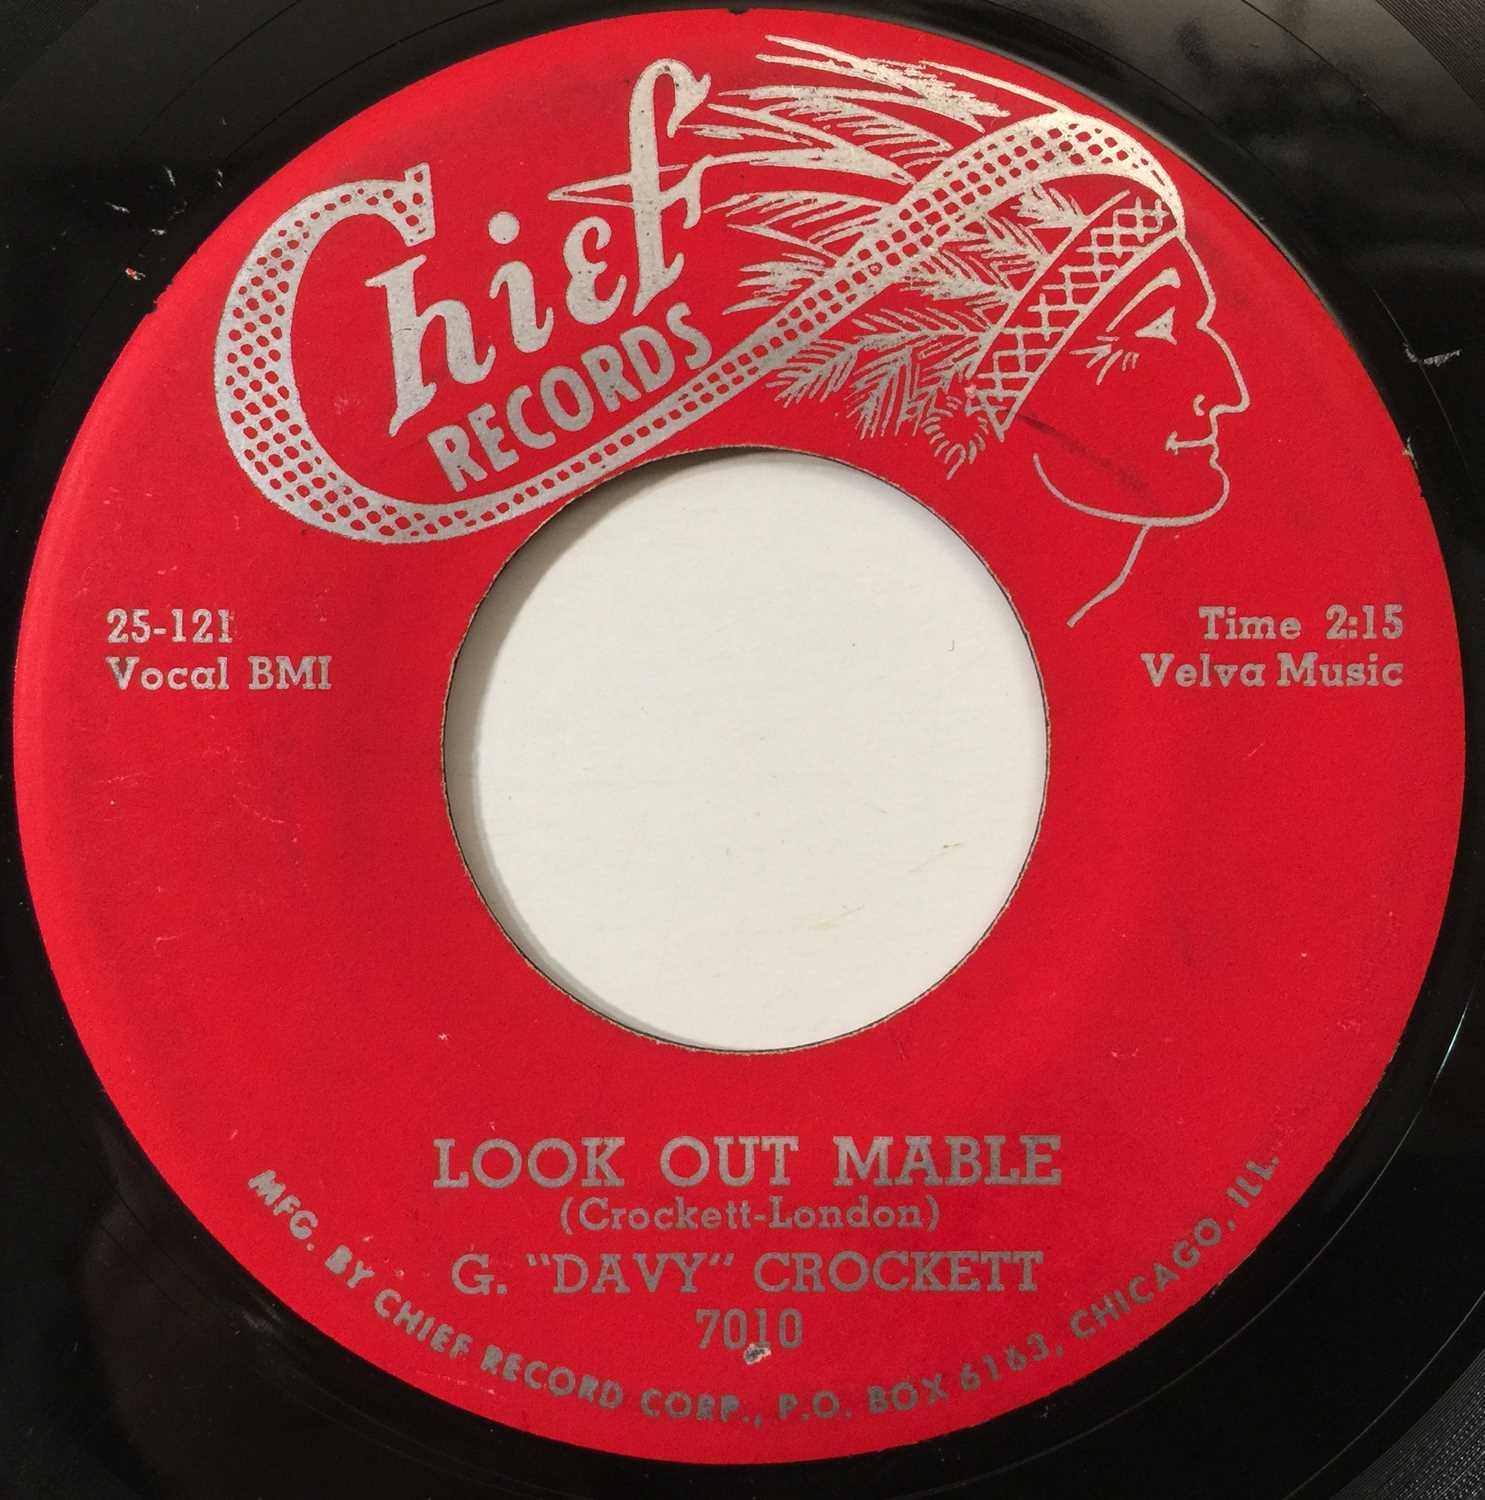 Lot 5 - G DAVY CROCKETT - LOOK OUT MABLE 7" (US ORIGINAL - CHIEF 7010)